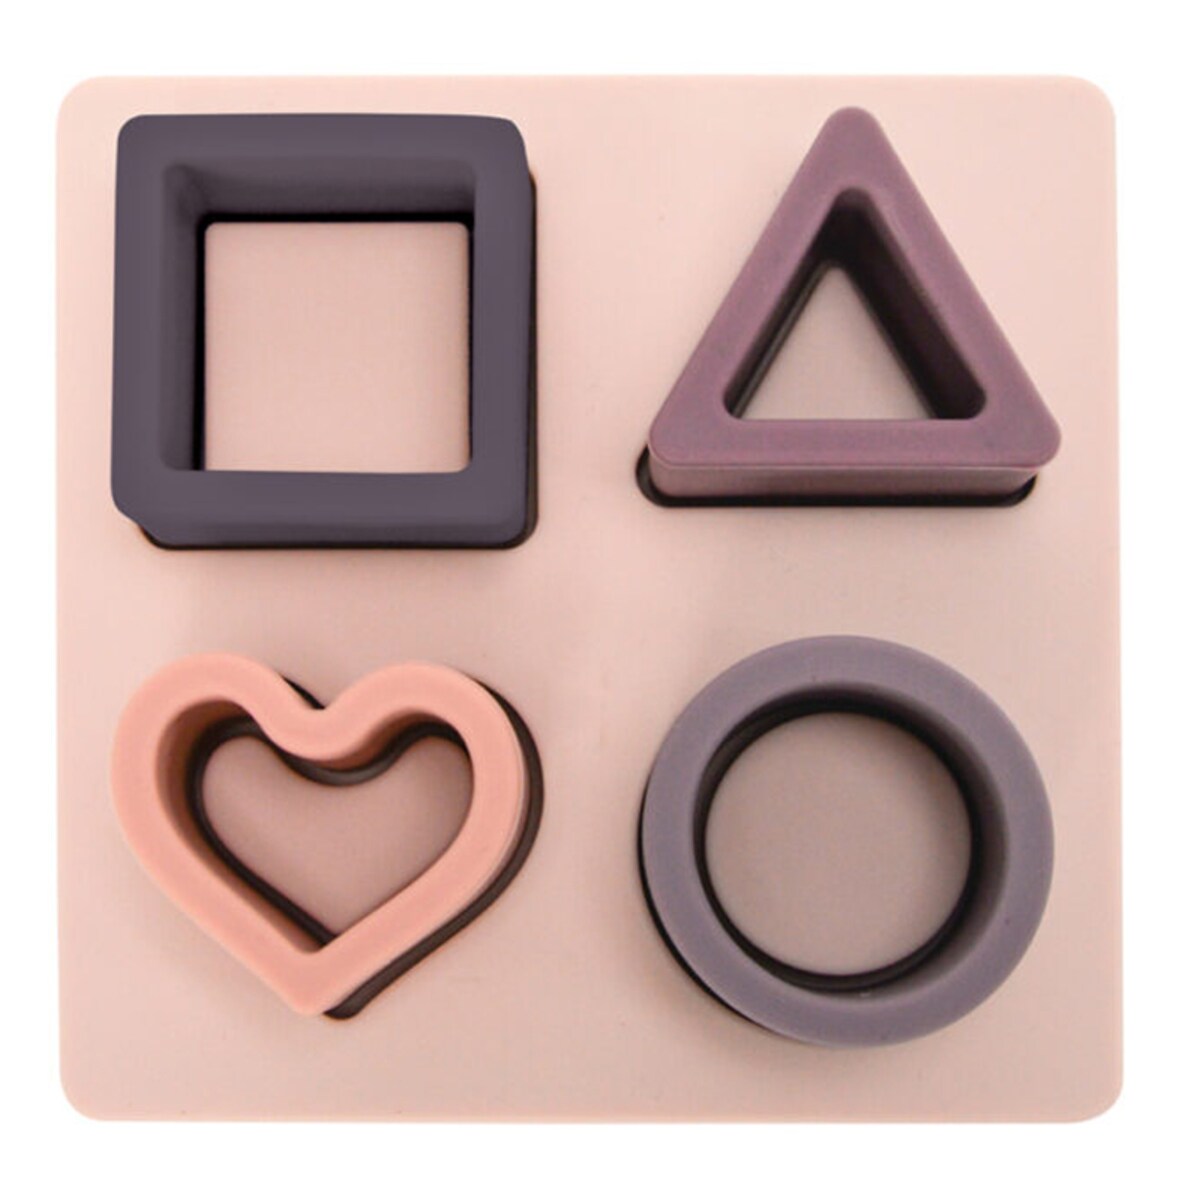 Annabel Trends Baby Silicone Puzzle Heart 12cm x 4.5cm